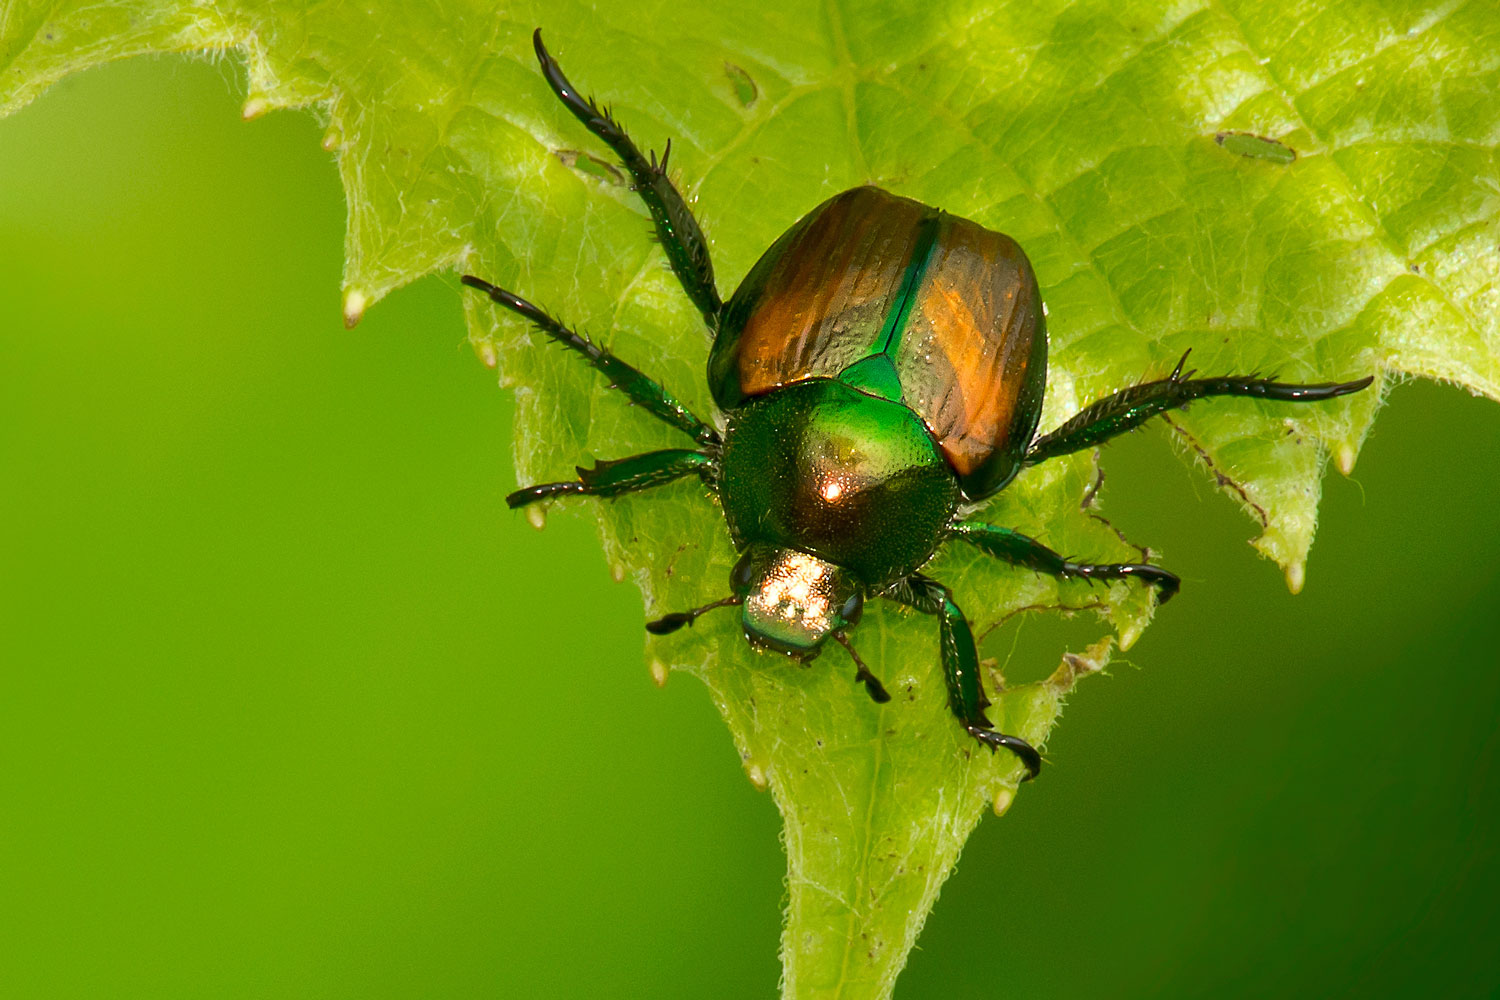 A Japanese beetle eating away the leaf of a plant